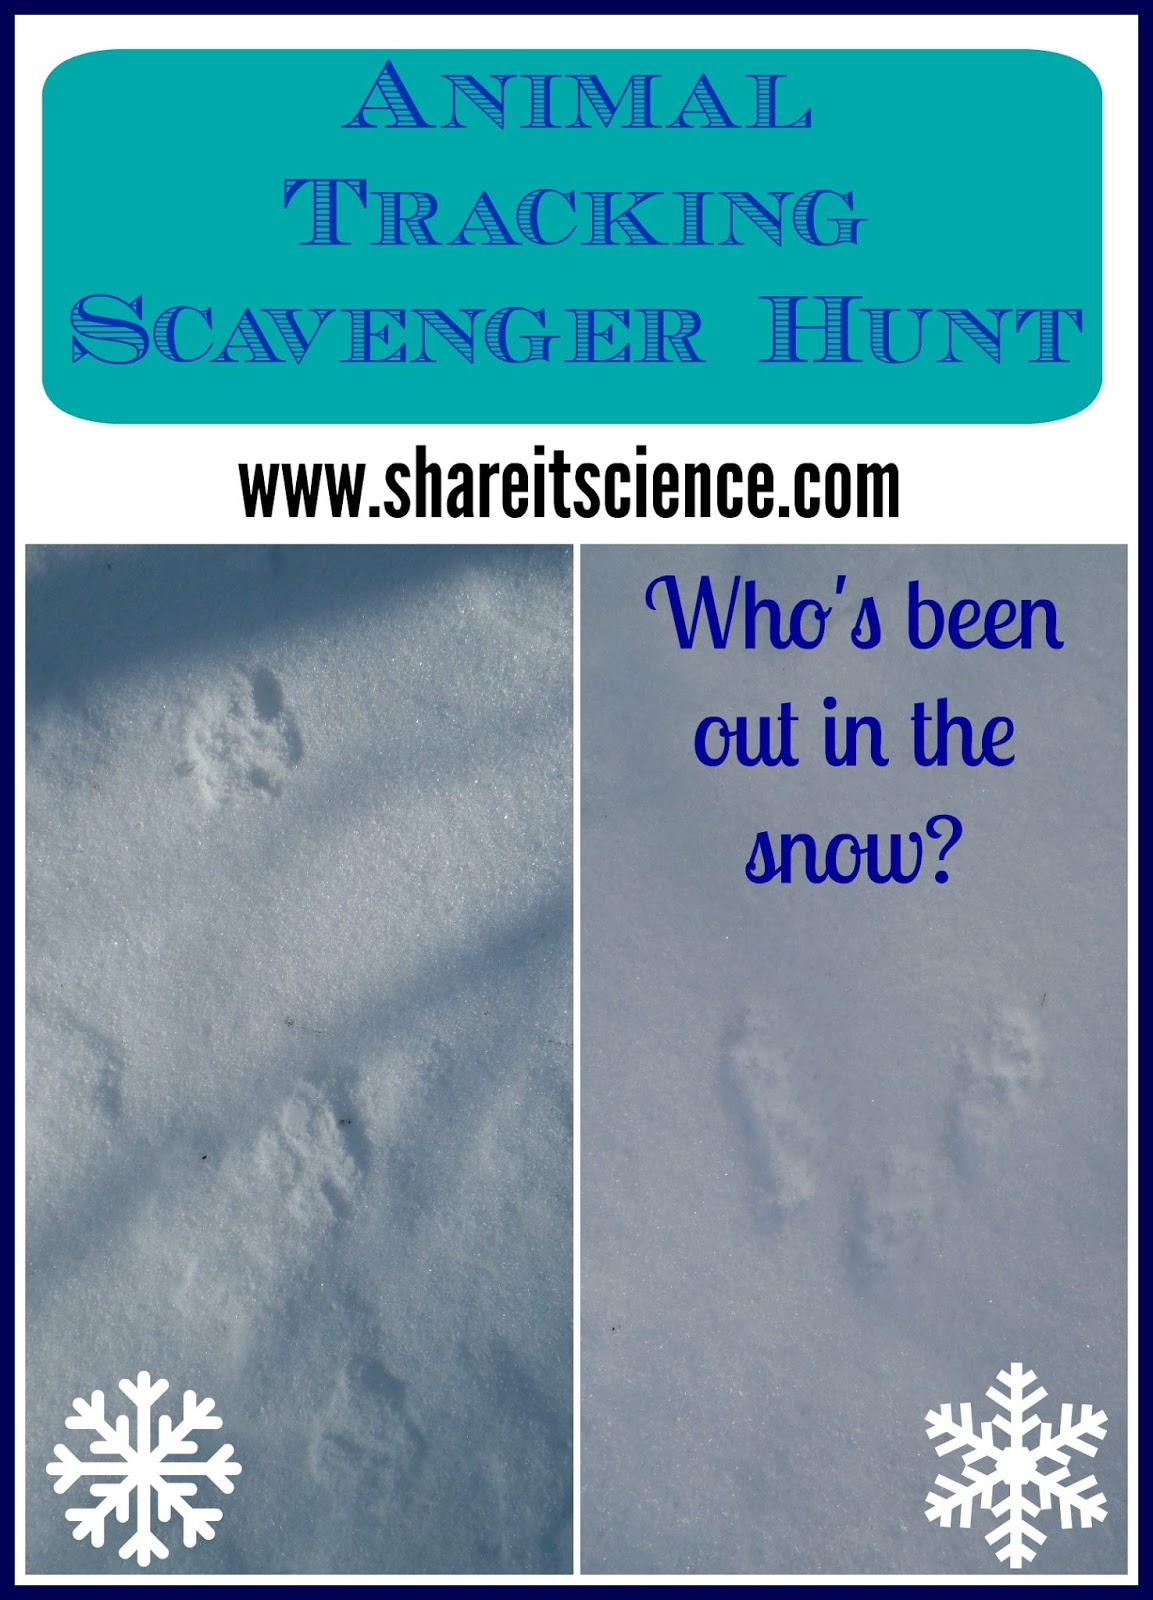 Share It! Science : Animal Tracking Scavenger Hunt